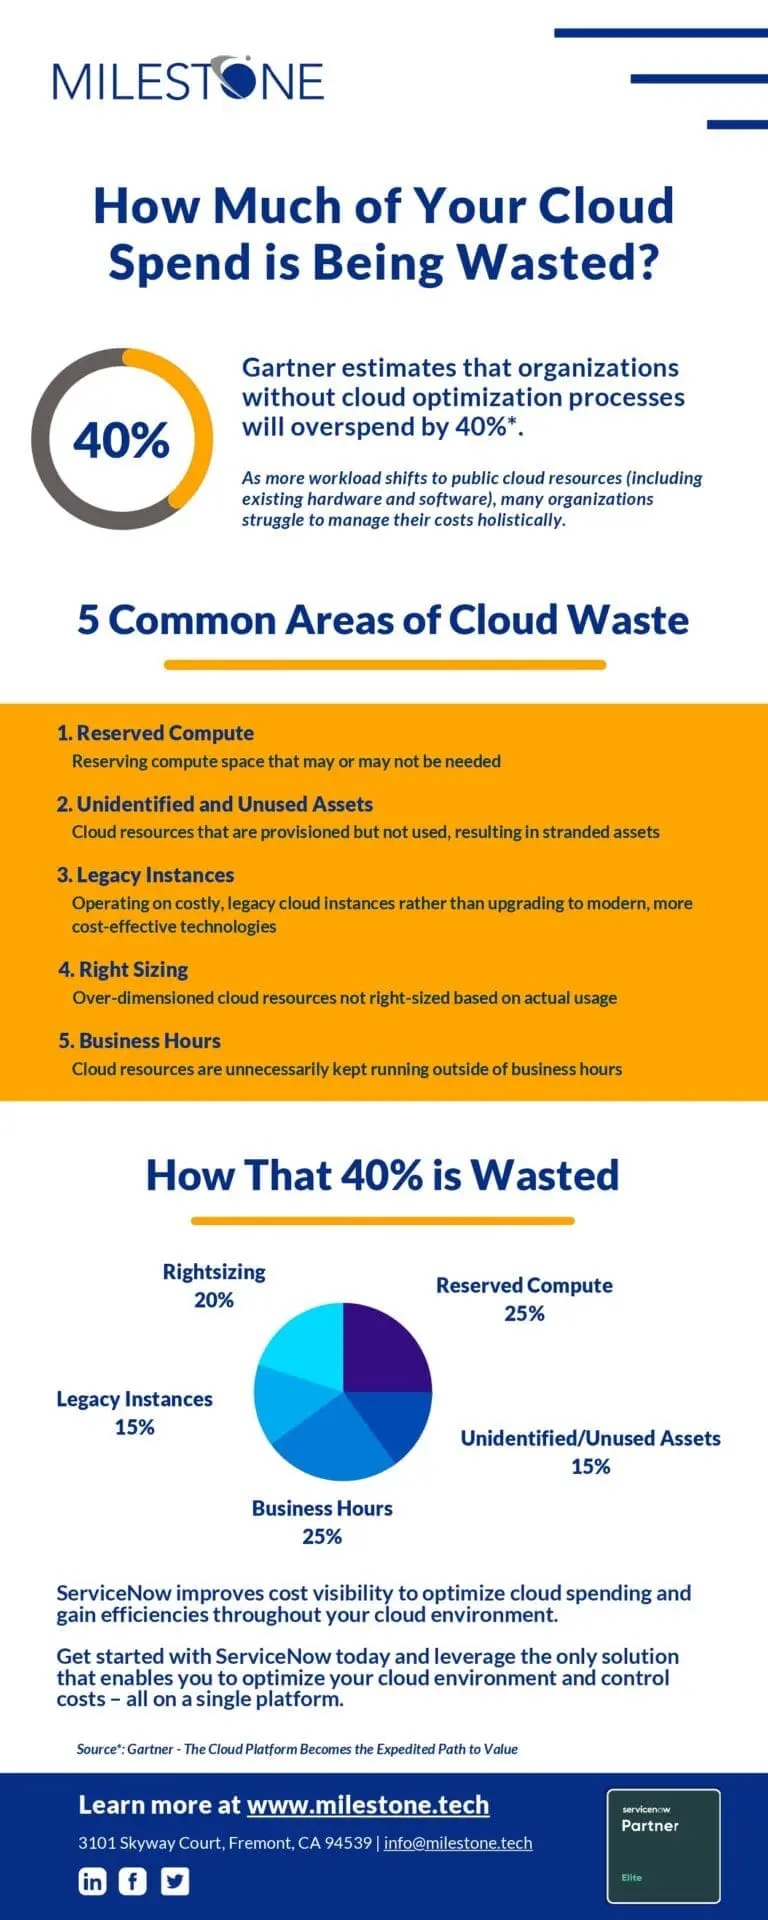 How Much of Your Cloud Spend is Being Wasted|How Much of Your Cloud Spend is Being Wasted|How Much of Your Cloud Spend is Being Wasted, How Much of Your Cloud Spend is Being Wasted? [Infographic]